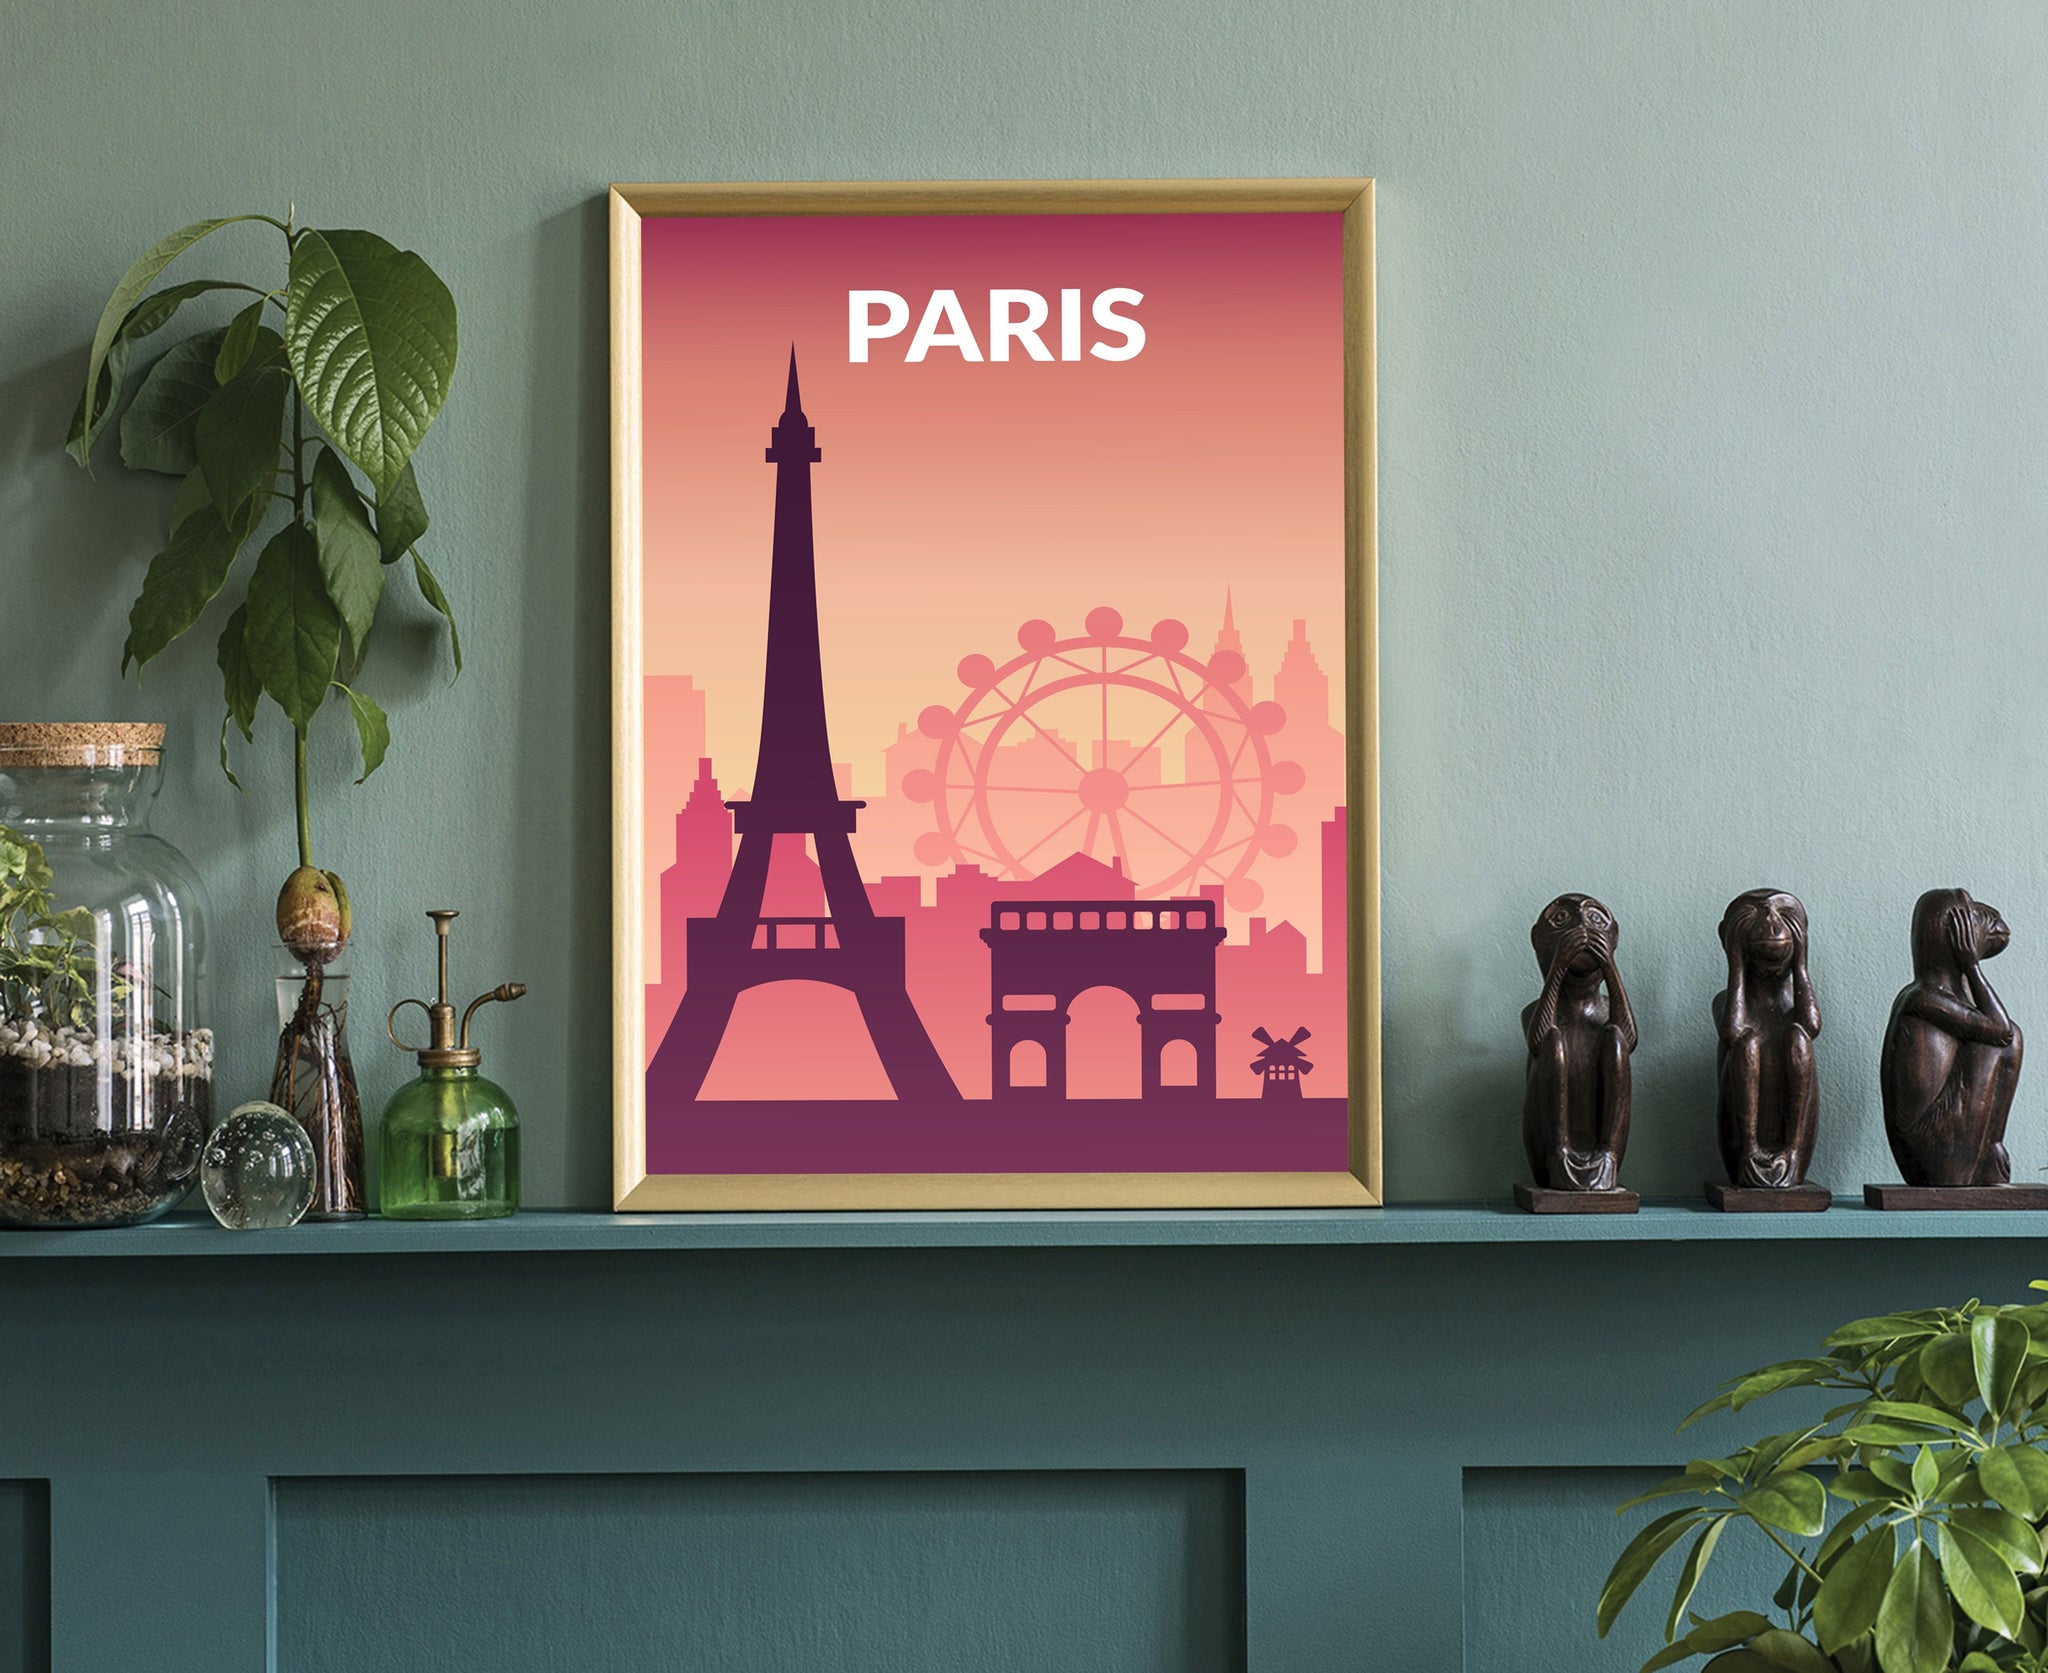 Solid Color World City Poster, France Paris Solid Color Modern Poster Print, Paris Modern City Poster, Office and Home Wall Decoration